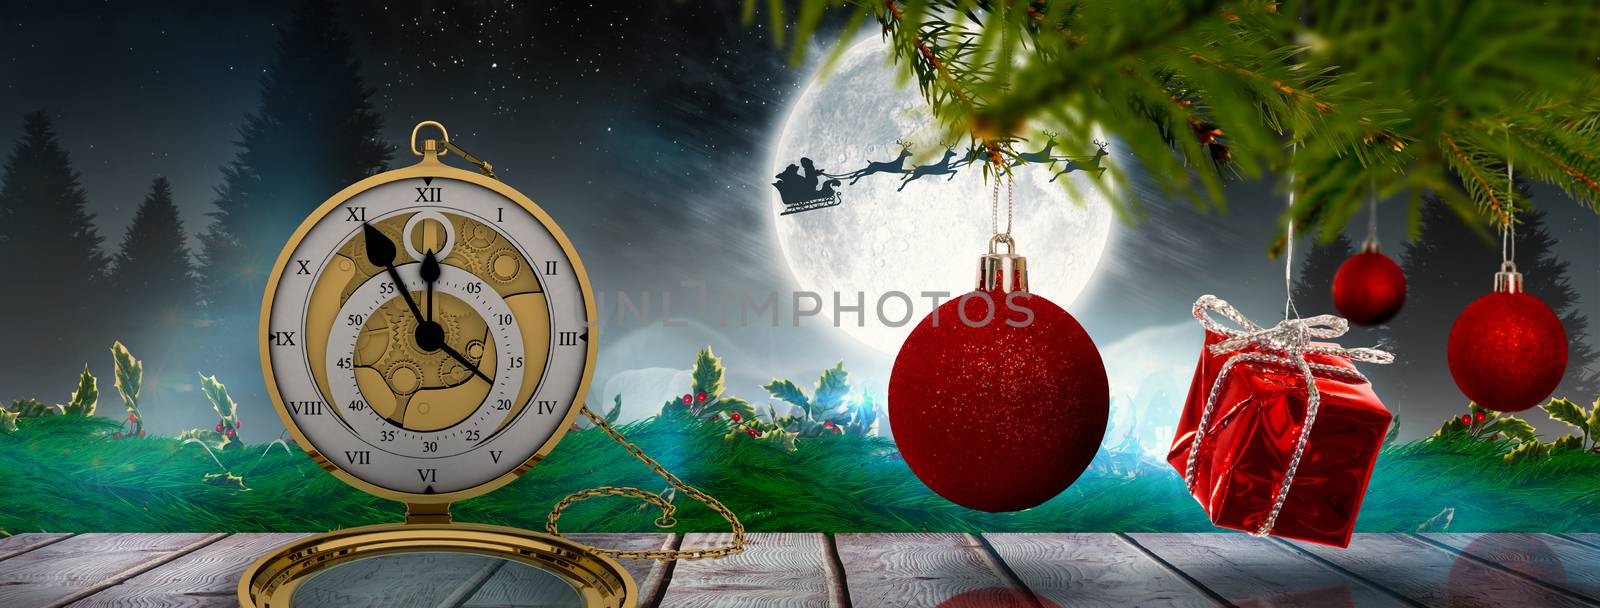 Composite image of decorations on tree by Wavebreakmedia